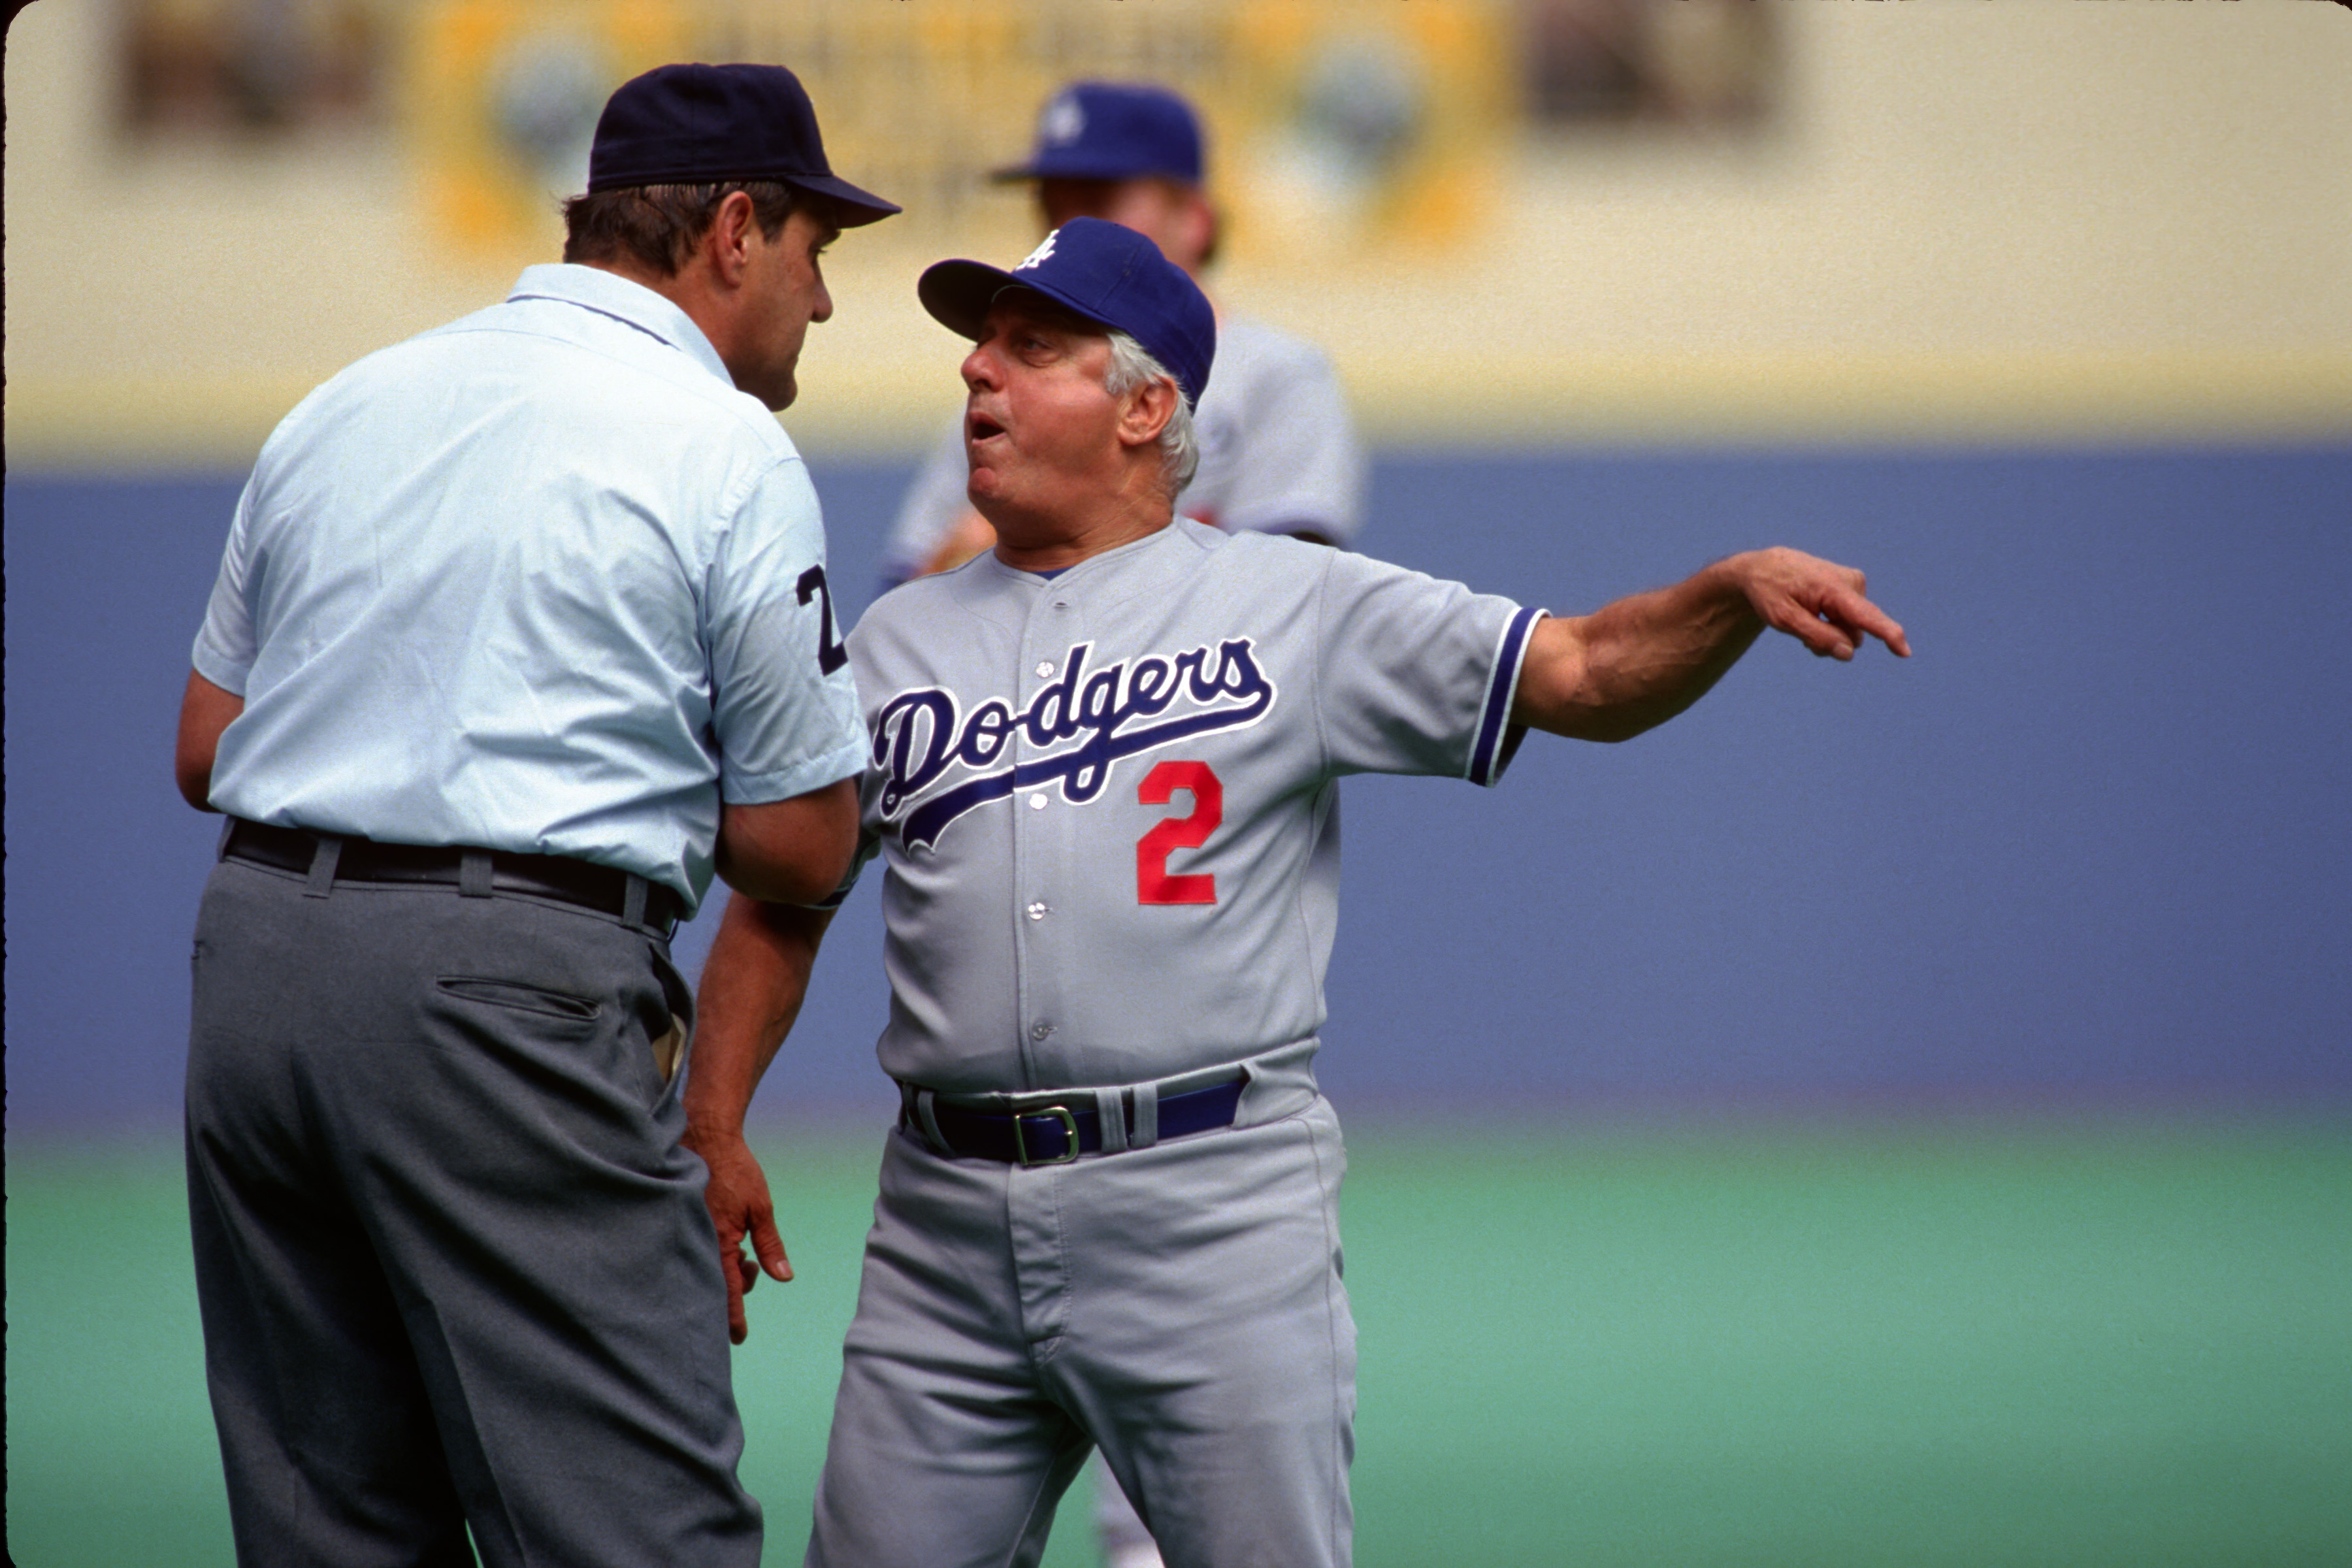 Tommy Lasorda, legendary Dodgers manager, dead at age 93